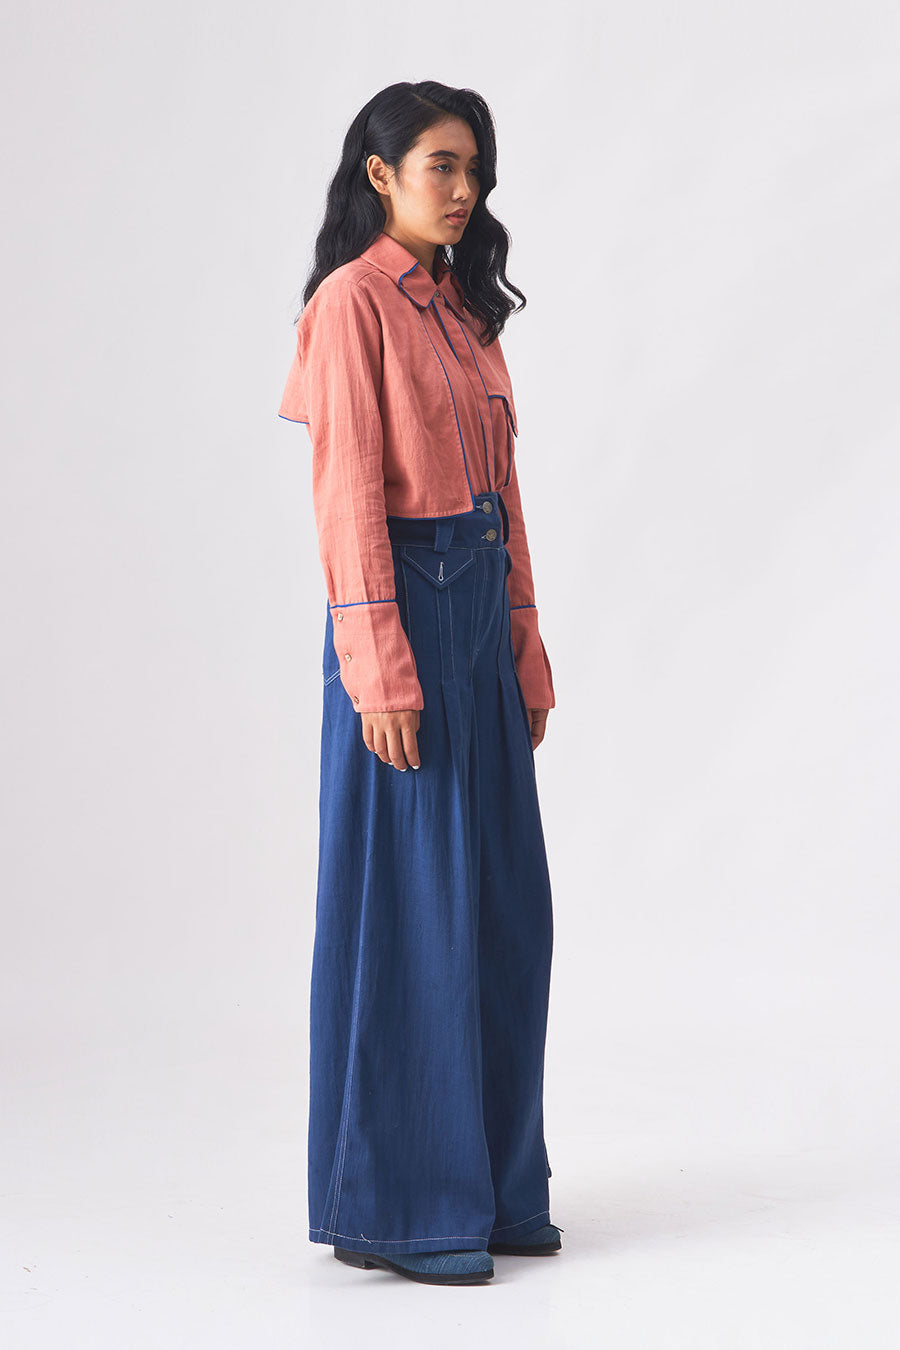 hakak silau on Twitter Denim palazzo The denim palazzo comes with  comfort and is designed with denim fabric The flare at the bottom makes  the pants look ravishing and is an absolute